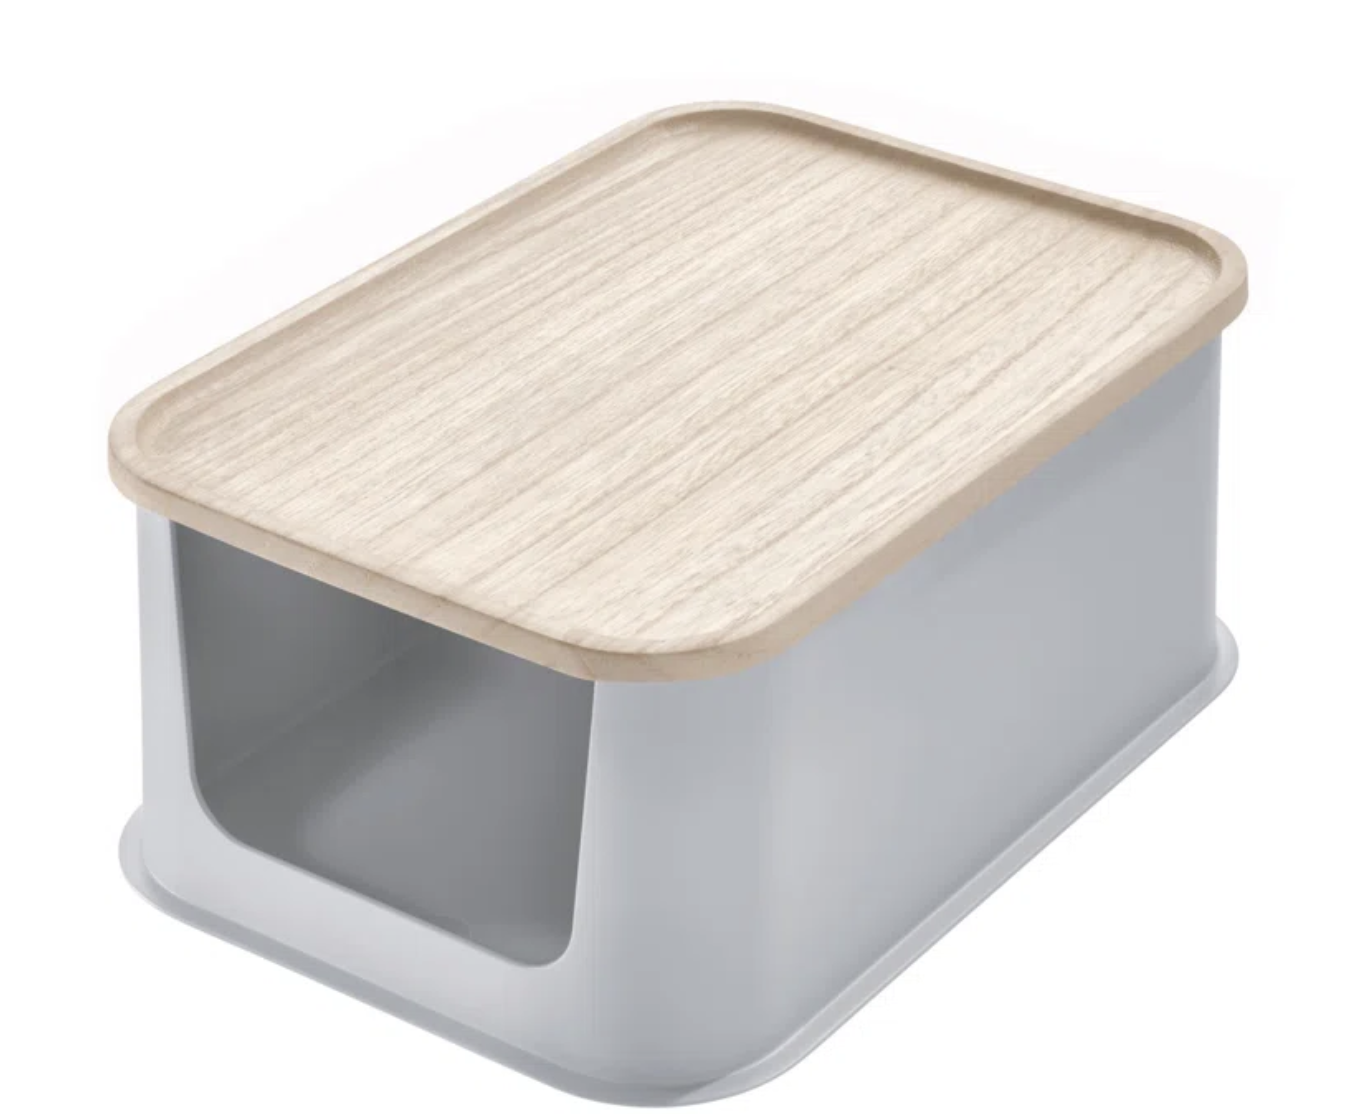 AllModern Eco Recycled Plastic Medium Open-Front Bin with Paulownia Wood Lid $23